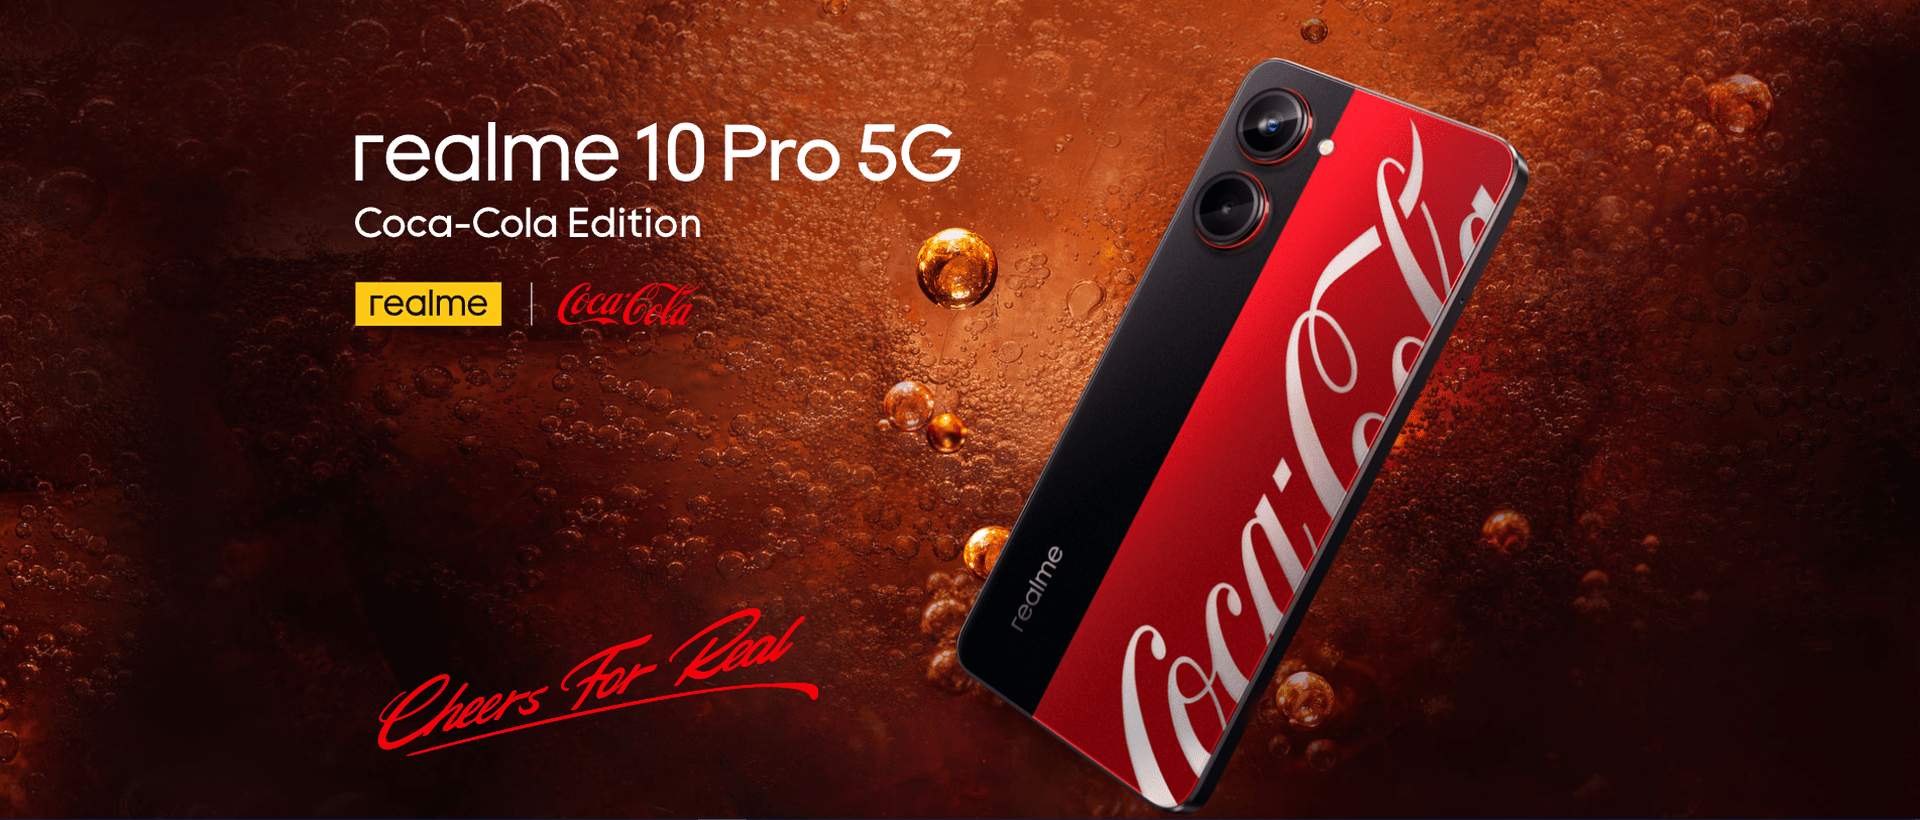 The new Coca-Cola themed Realme 10 Pro will be on sale at 12:00 pm on 14th February